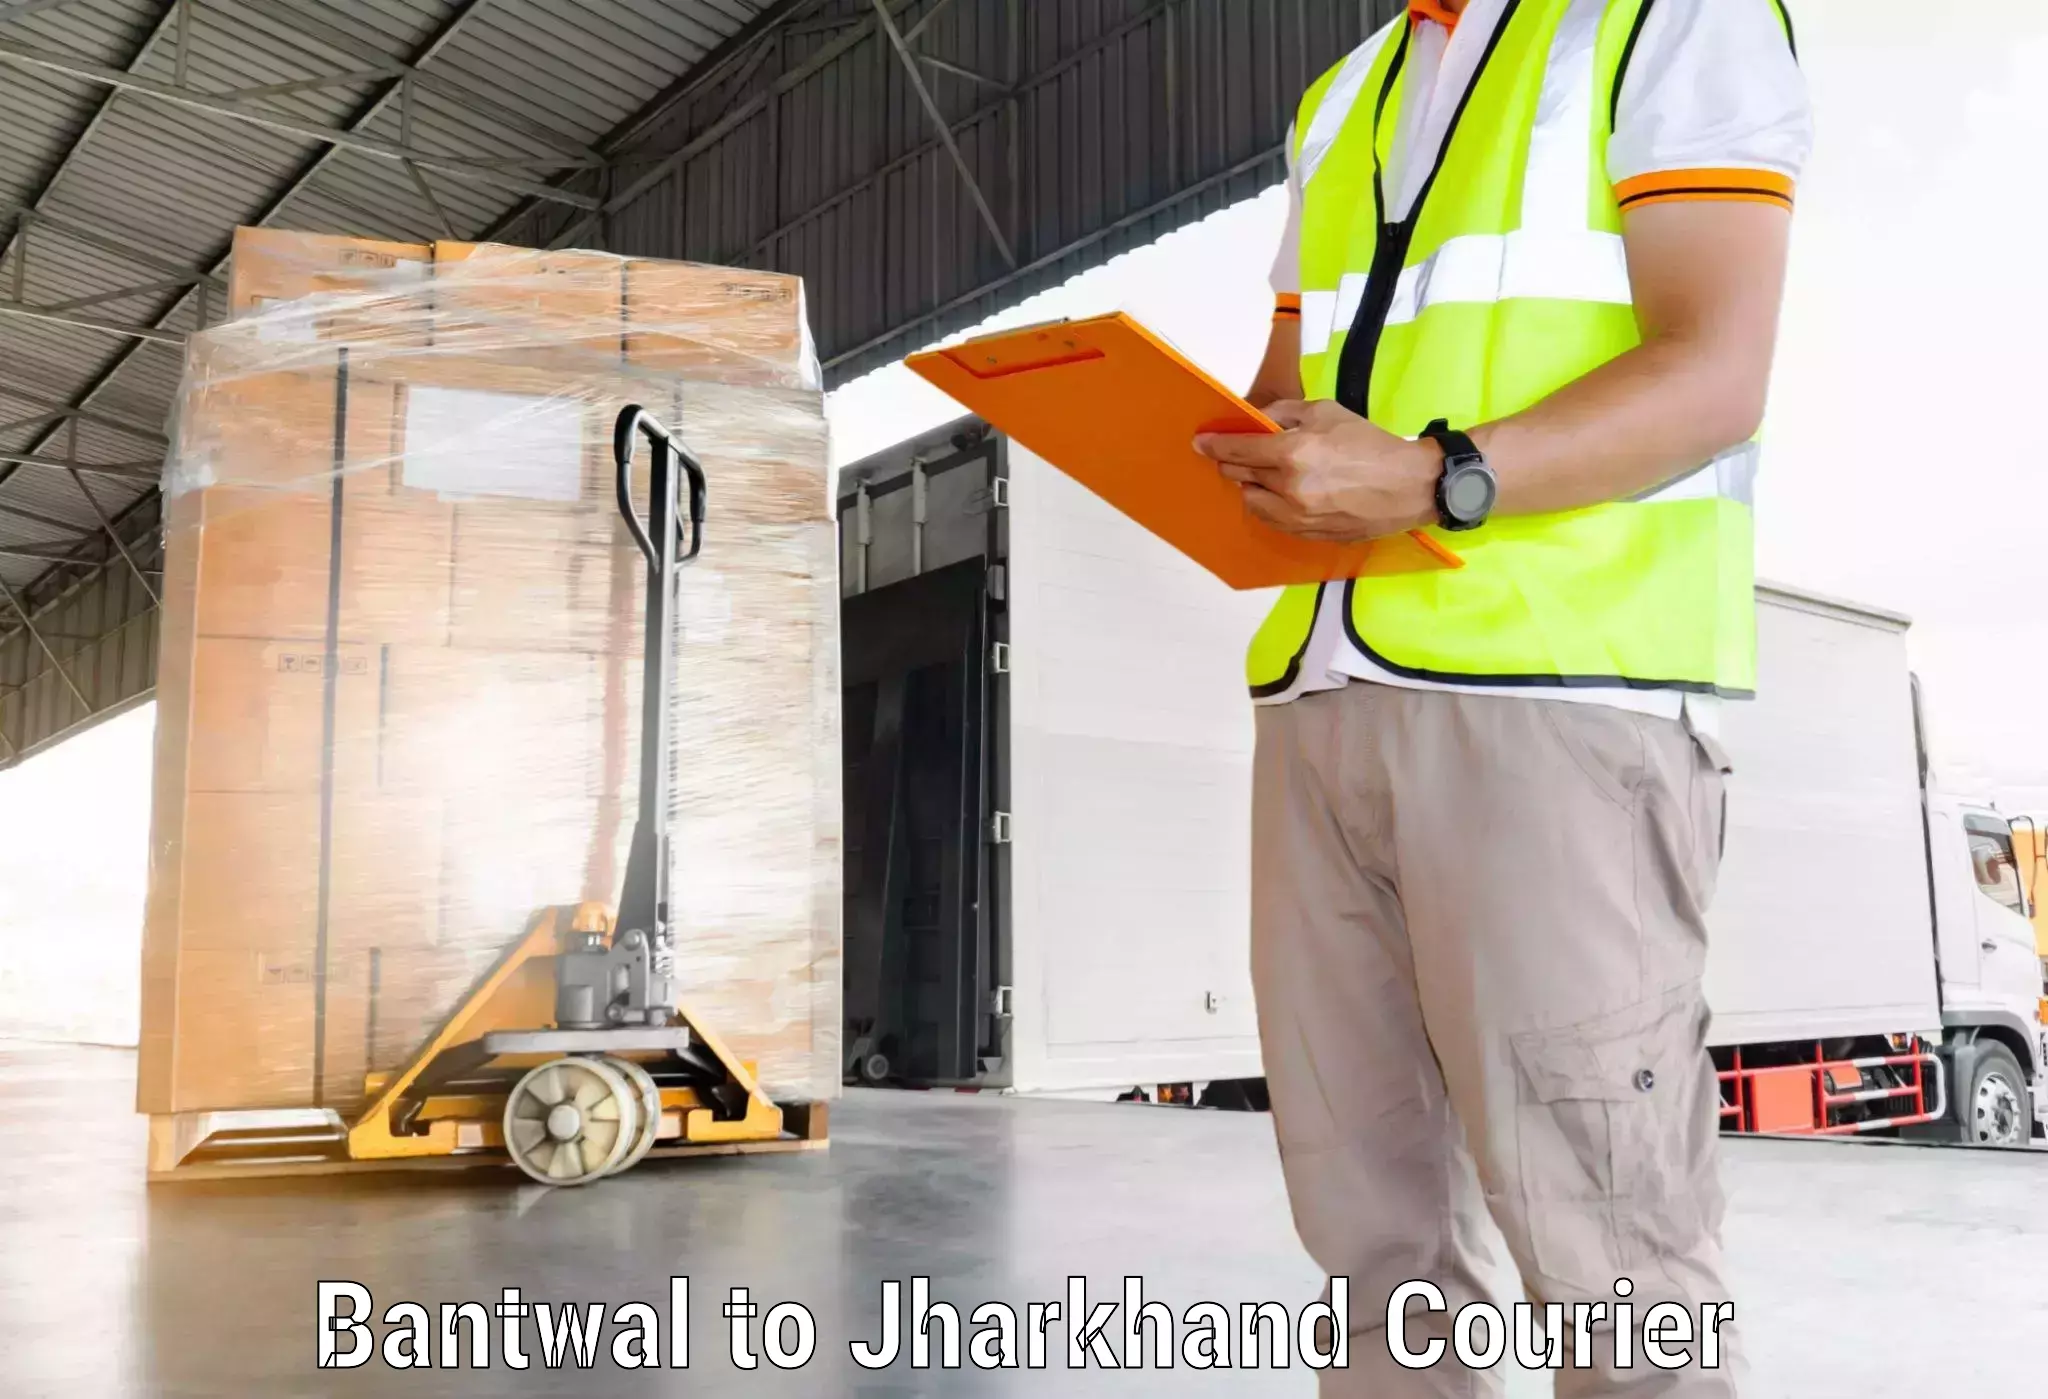 On-call courier service Bantwal to Kedla